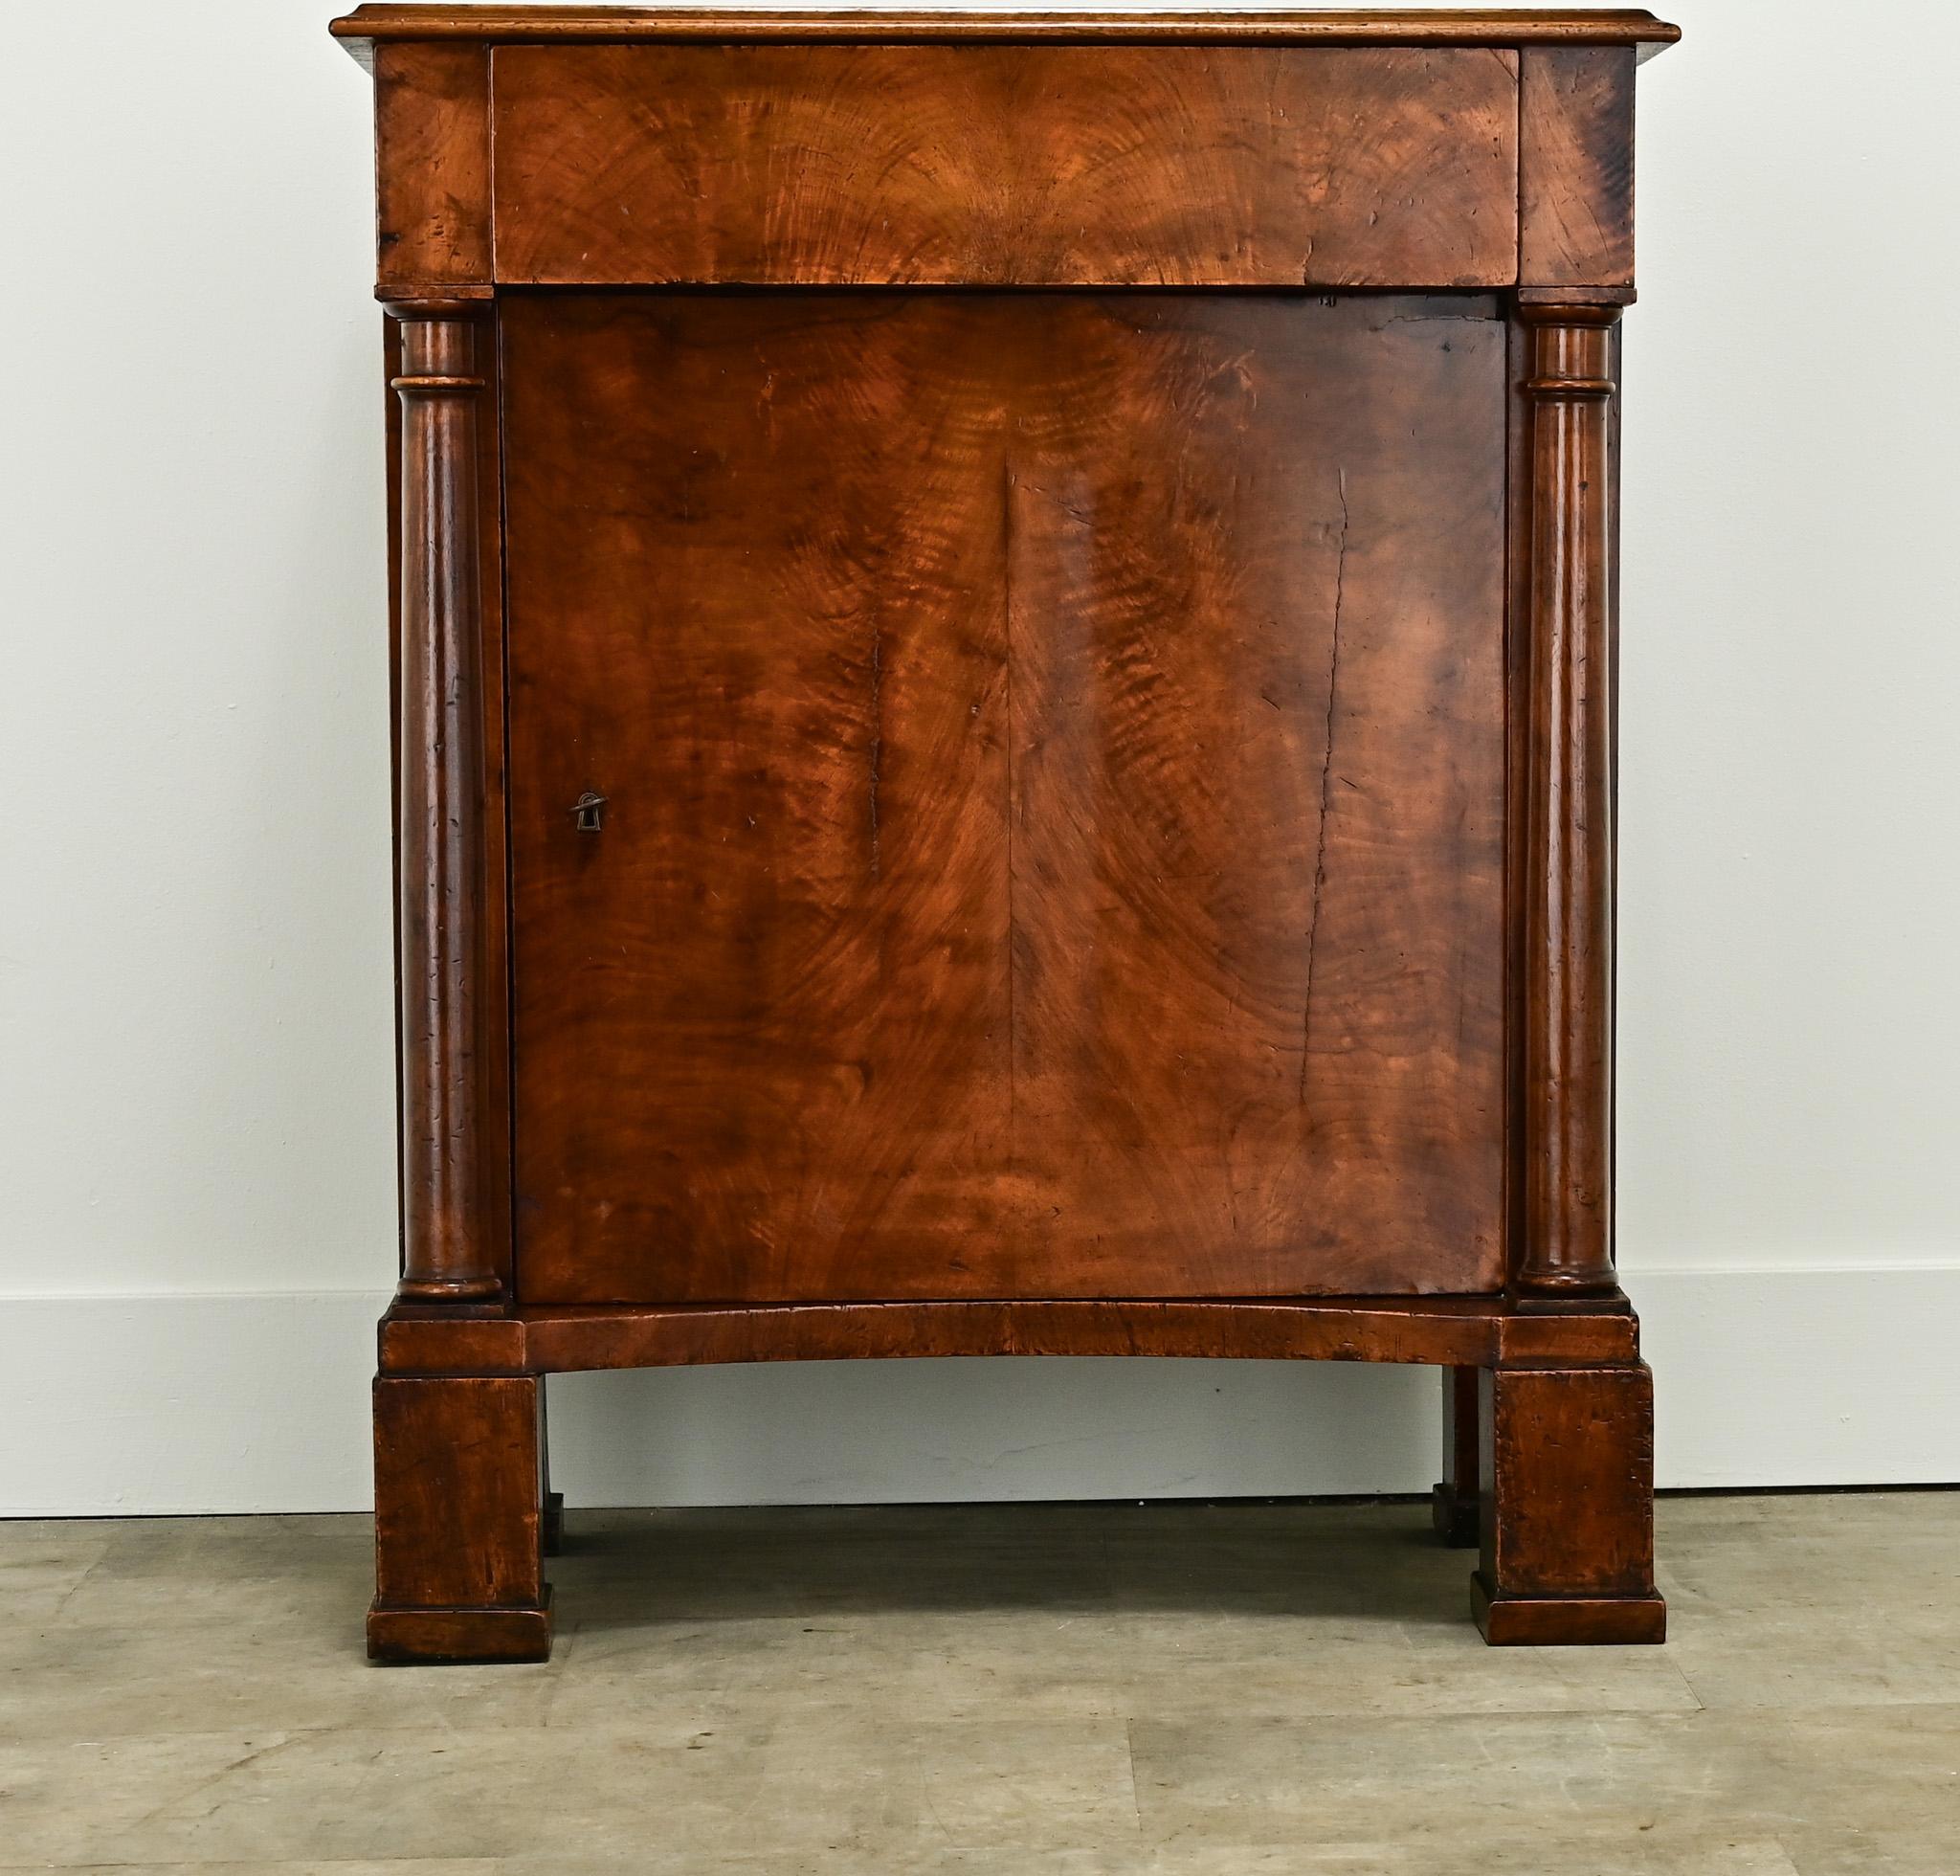 A unique walnut cabinet made in the Netherlands during the 1800’s. It has the clean lines of an English antique in the style of the French Empire and is made of solid burl walnut. A simple walnut top sits over a single drawer and door flanked by